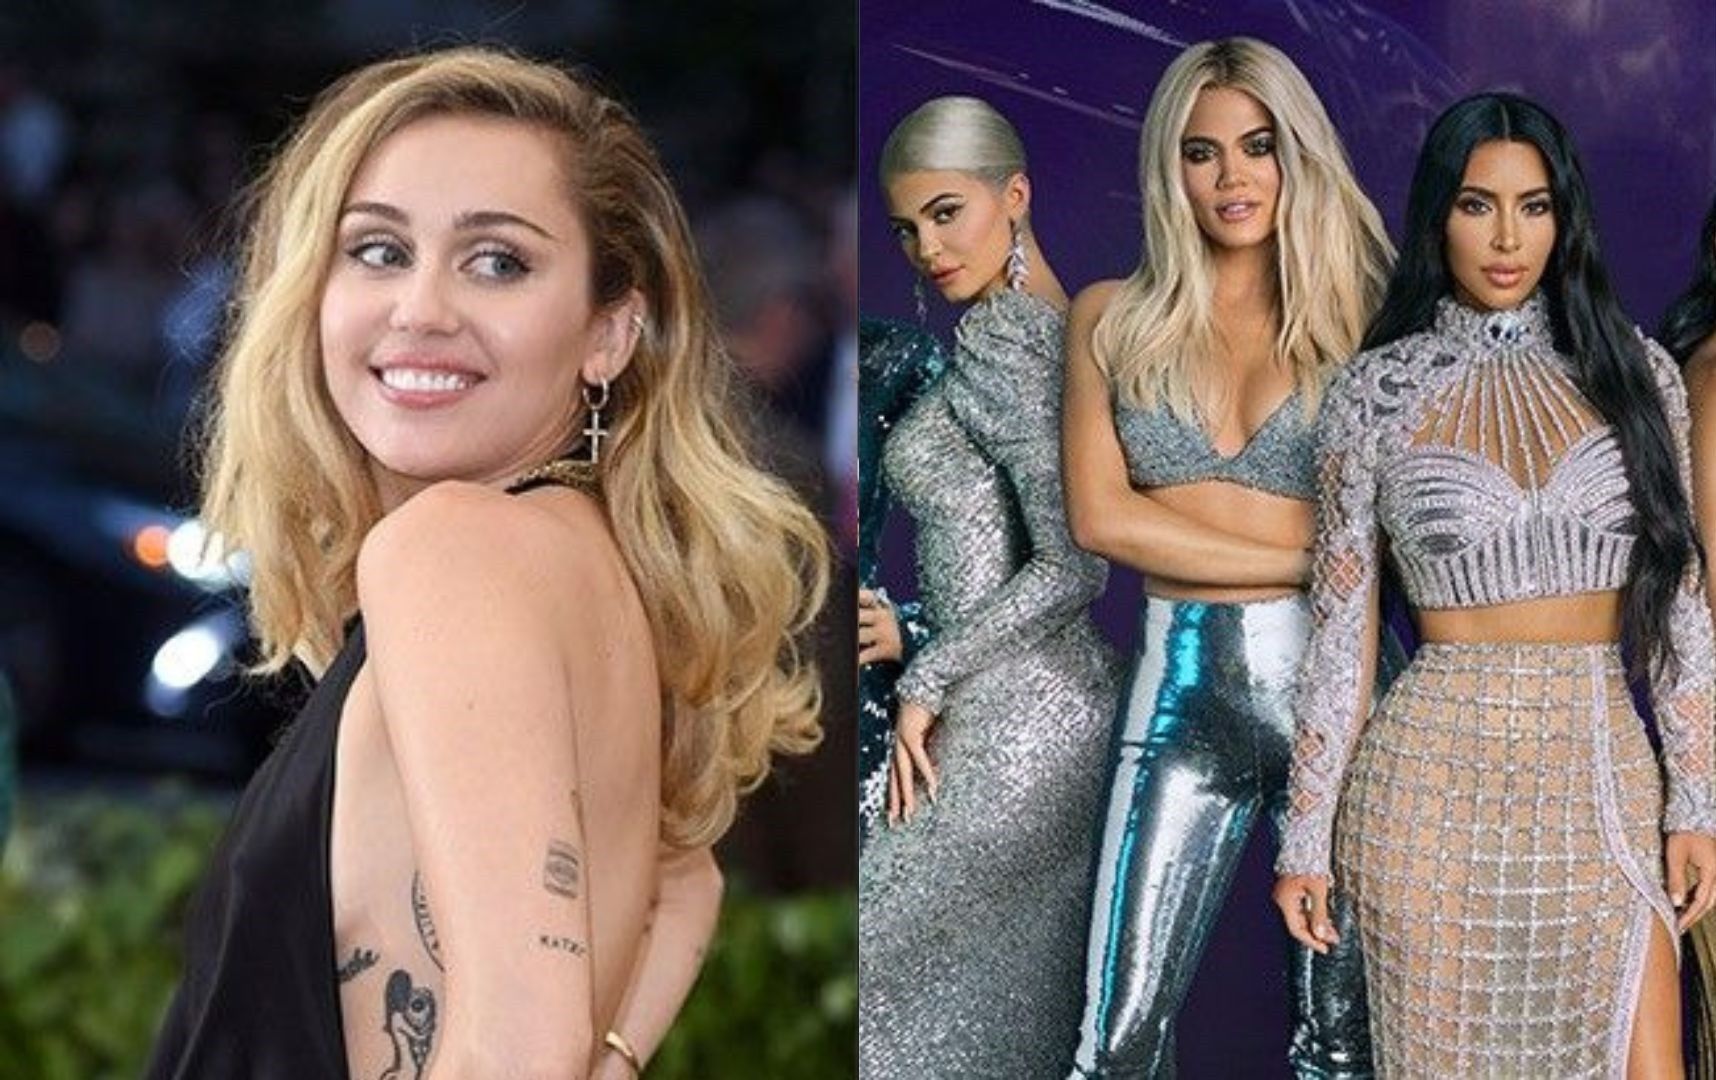 Miley Cyrus, Kardashian sisters are the most-searched 'nepo babies'